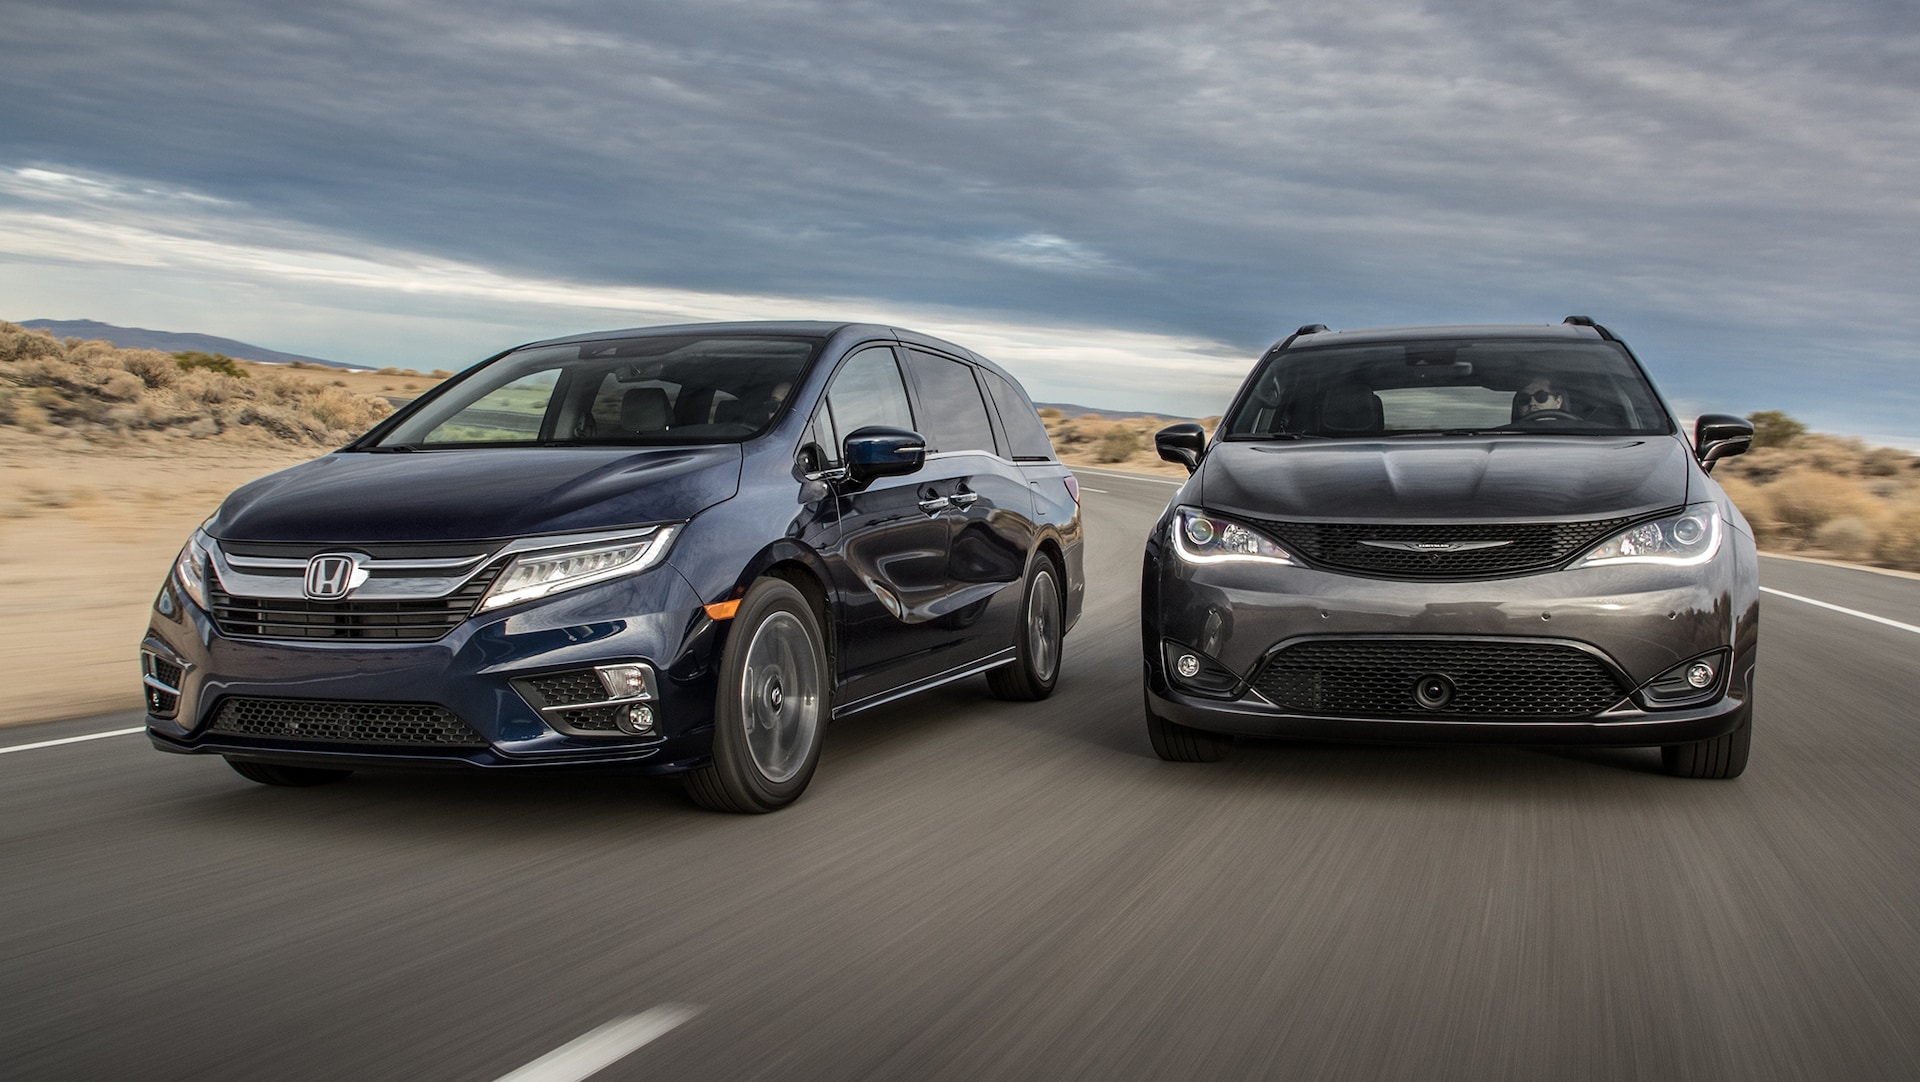 Chrysler Pacifica vs Honda Odyssey Which Minivan is the Best for Your